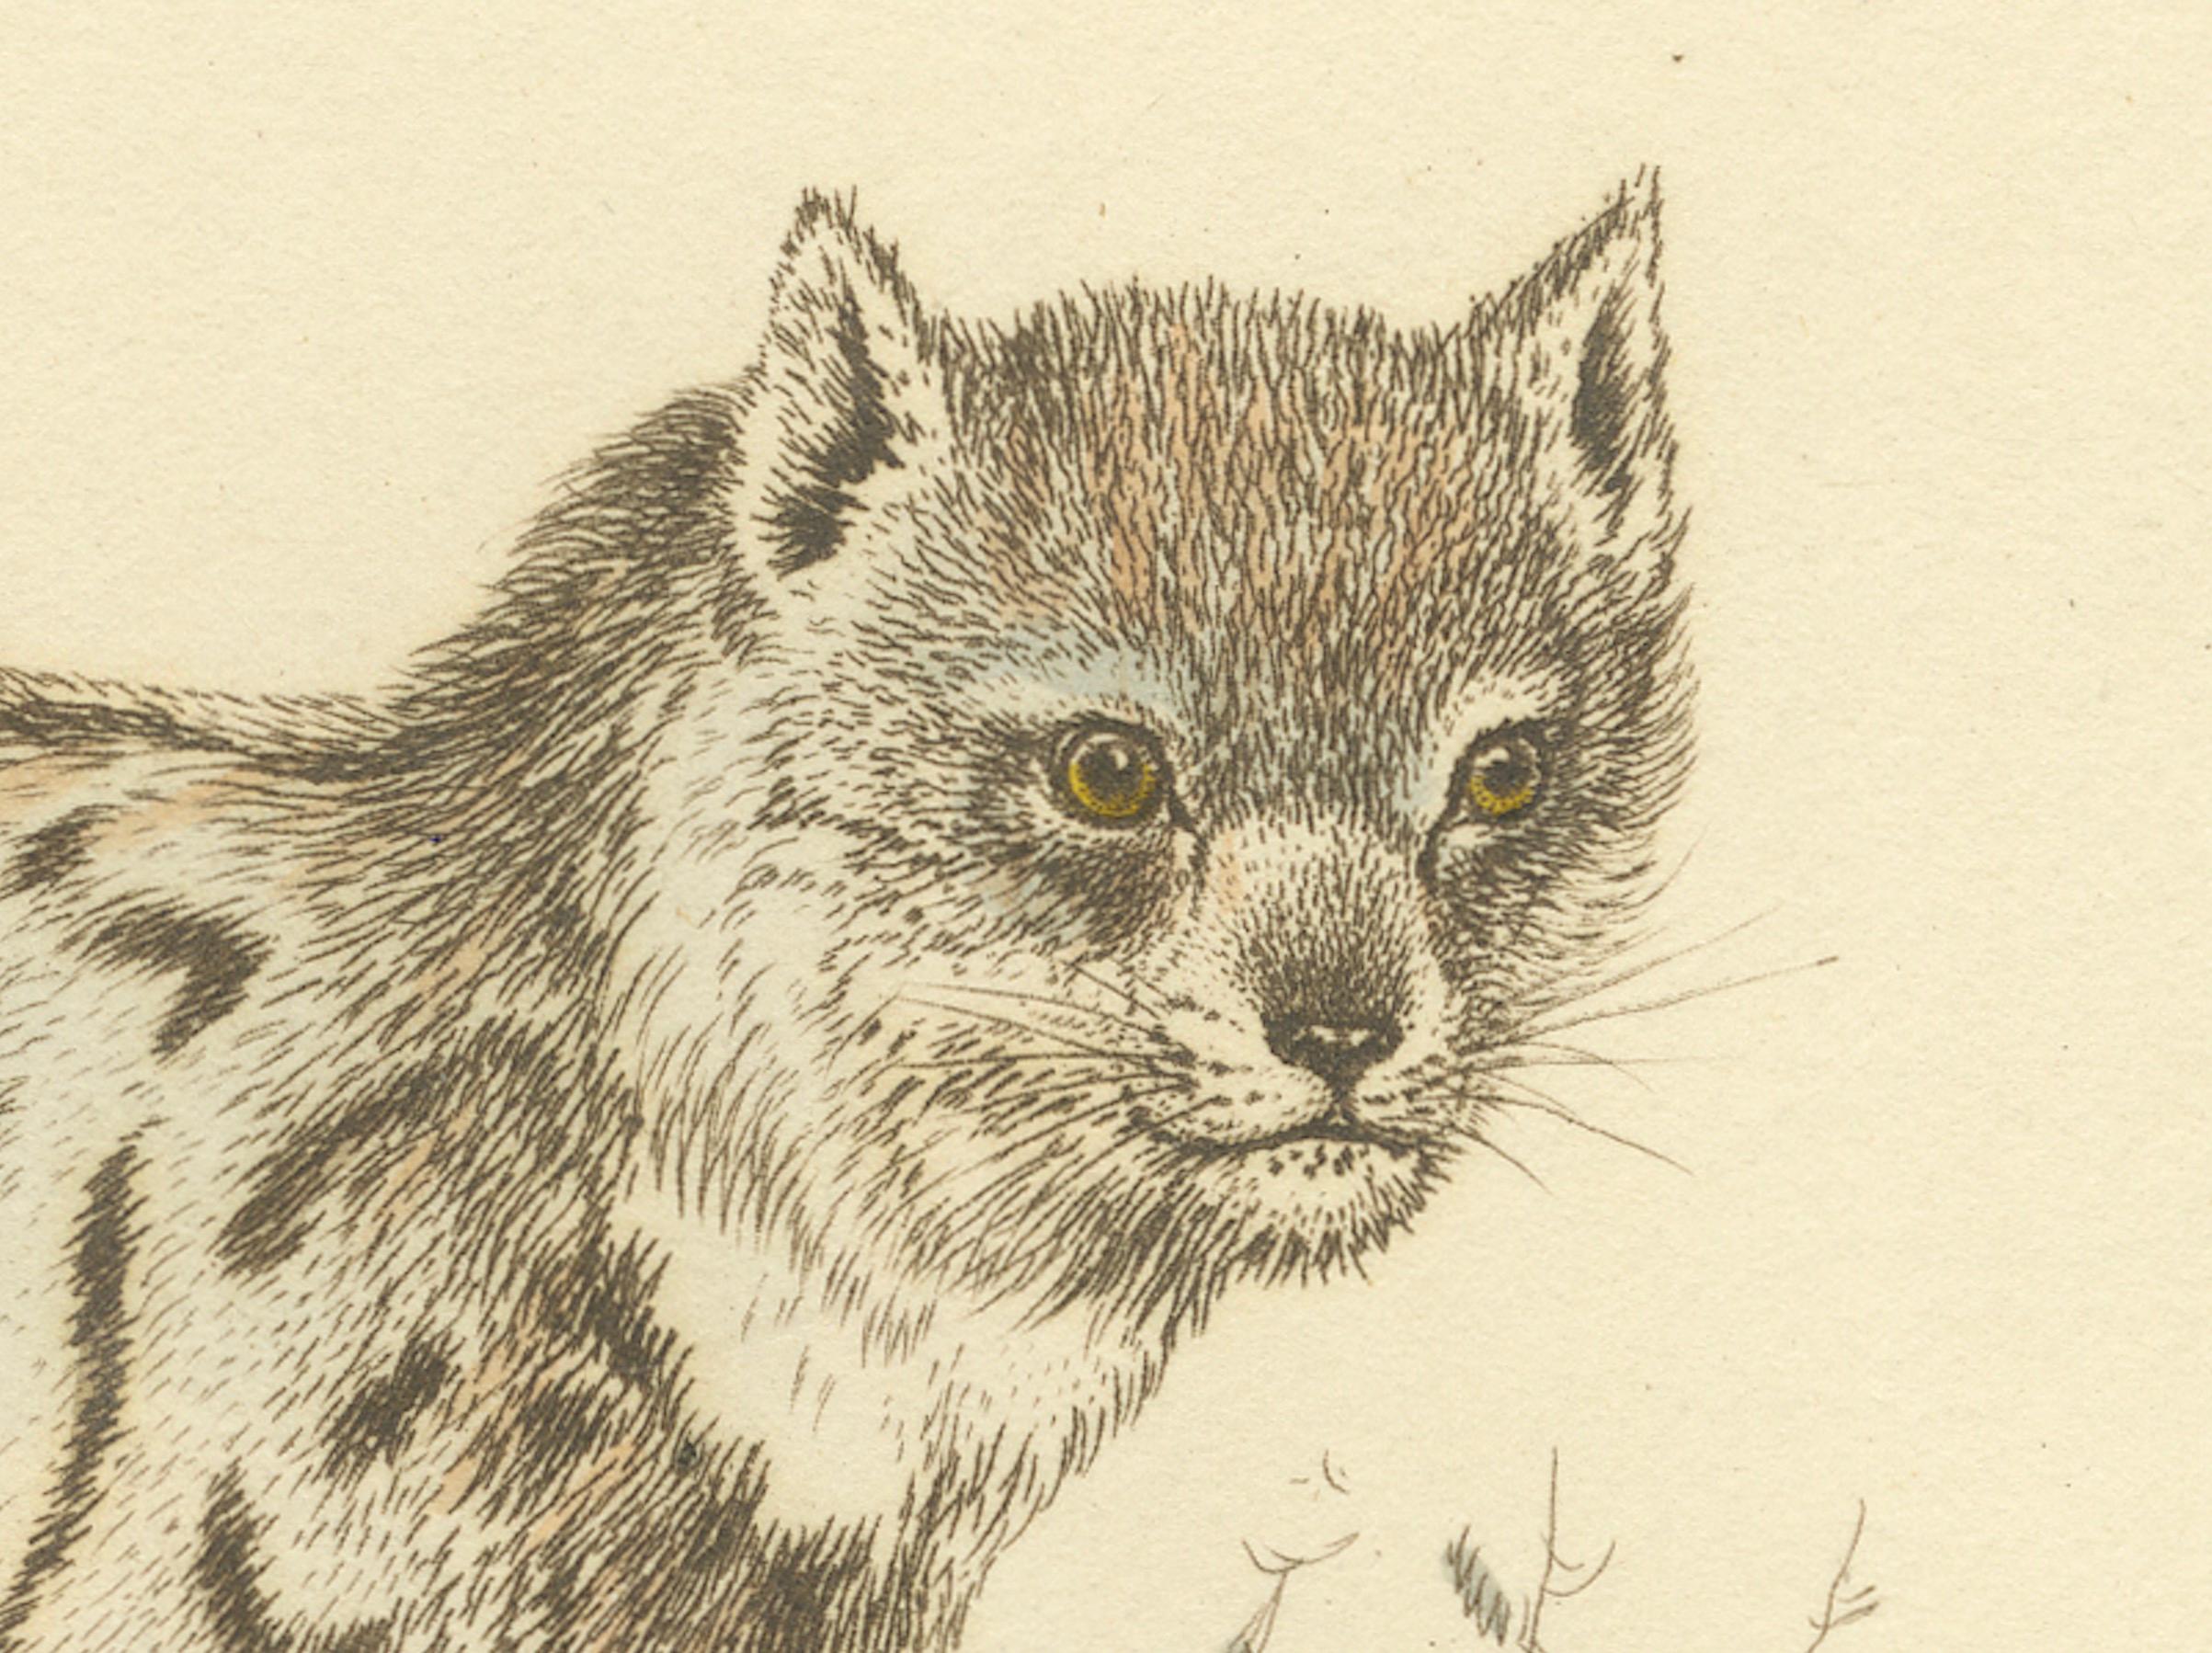 An original hand-coloured antique print featuring a Siberian lynx, which is a subspecies of the Eurasian lynx. This print, titled 'The Lynx of Siberia', would have been part of a work published by G.B. Whittaker and based on an illustration by